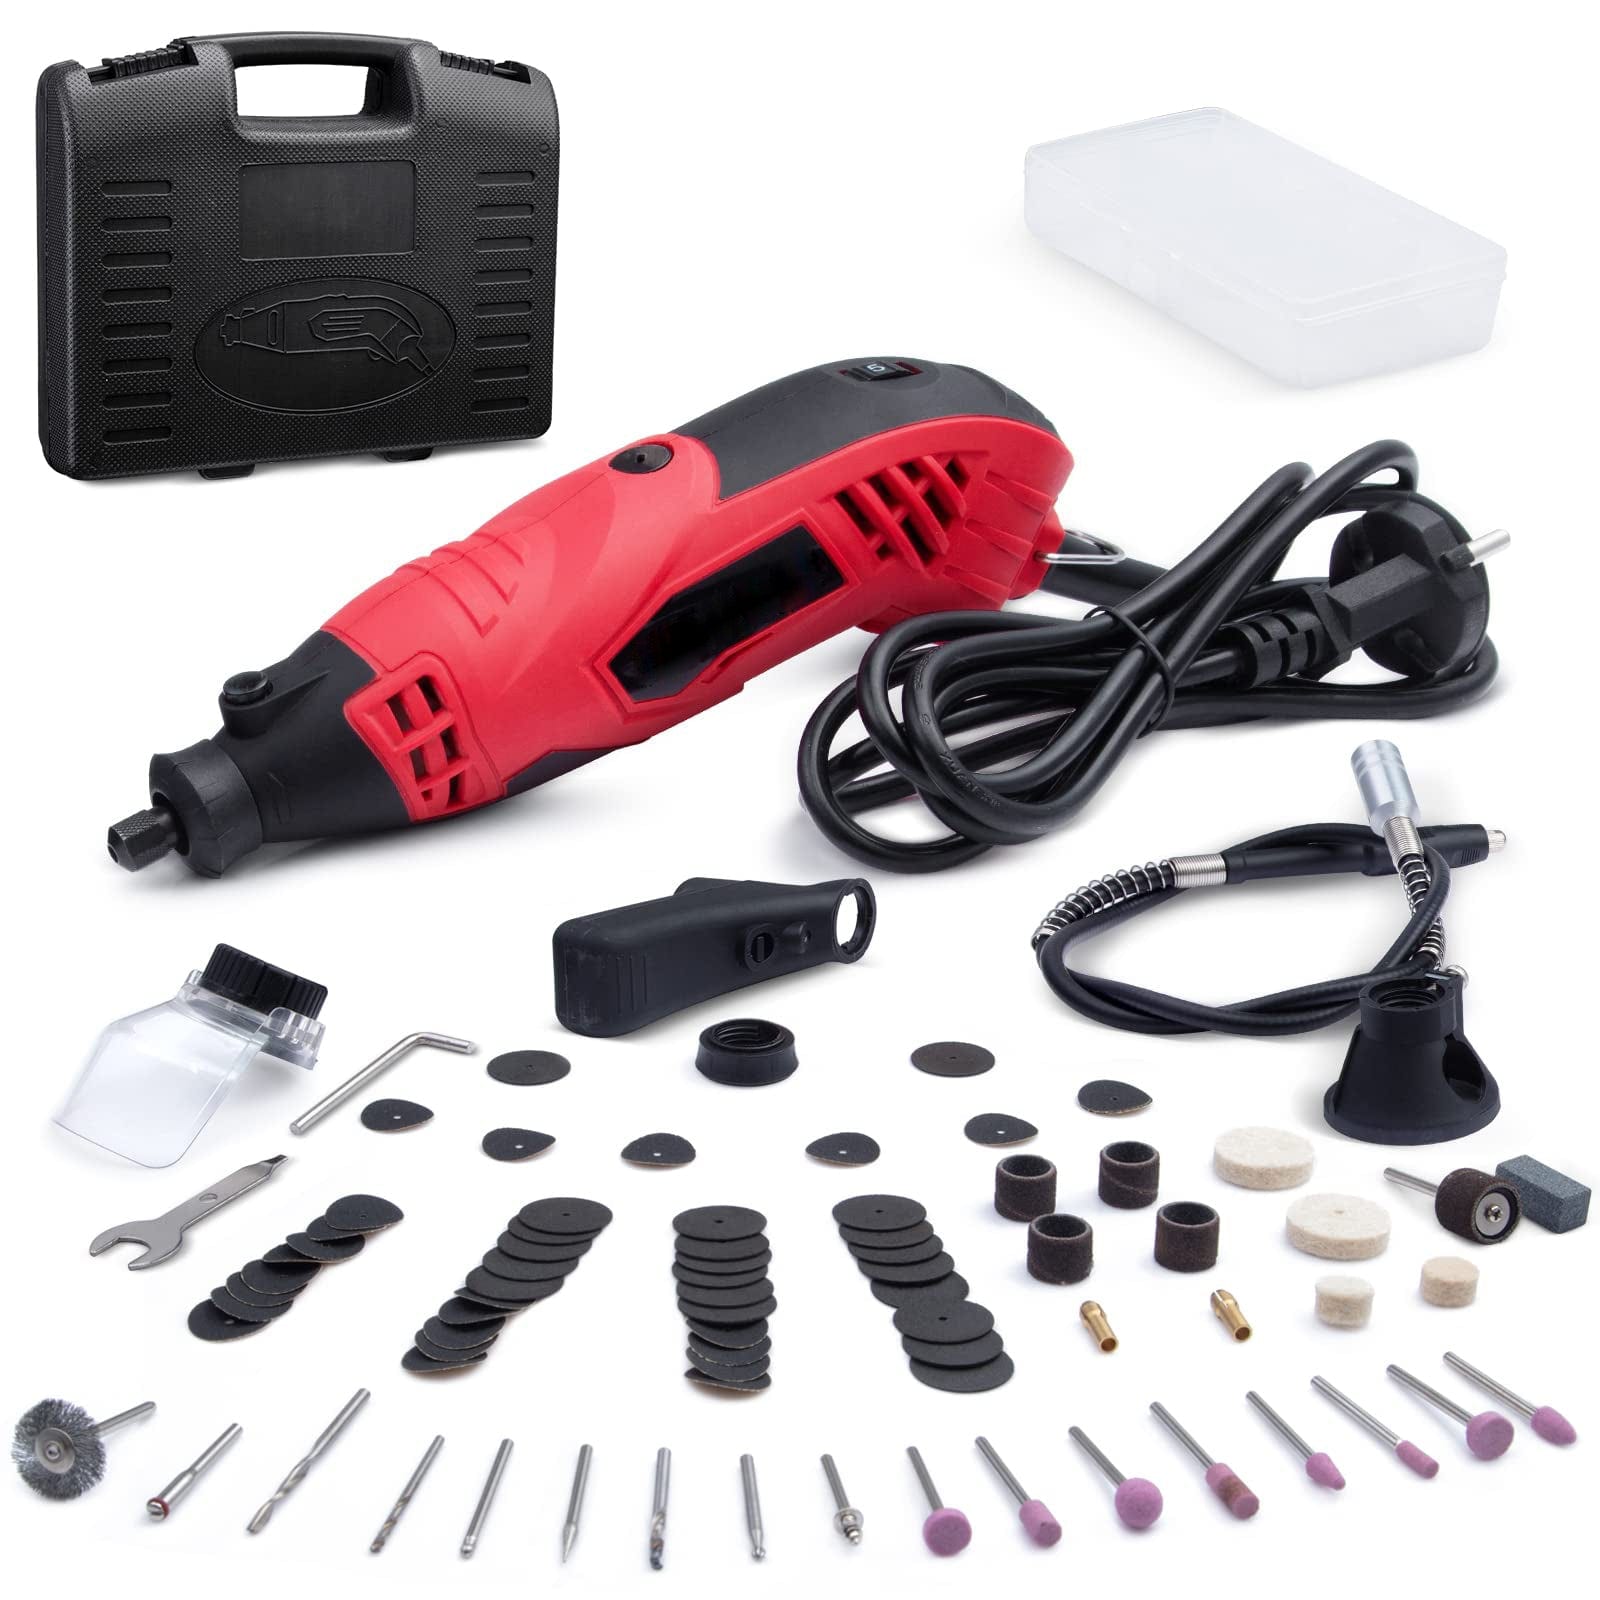 GARVEE 88pcs Rotary Tool Kit 1.5Amp Variable Speed with Flex Shaft DIY Projects